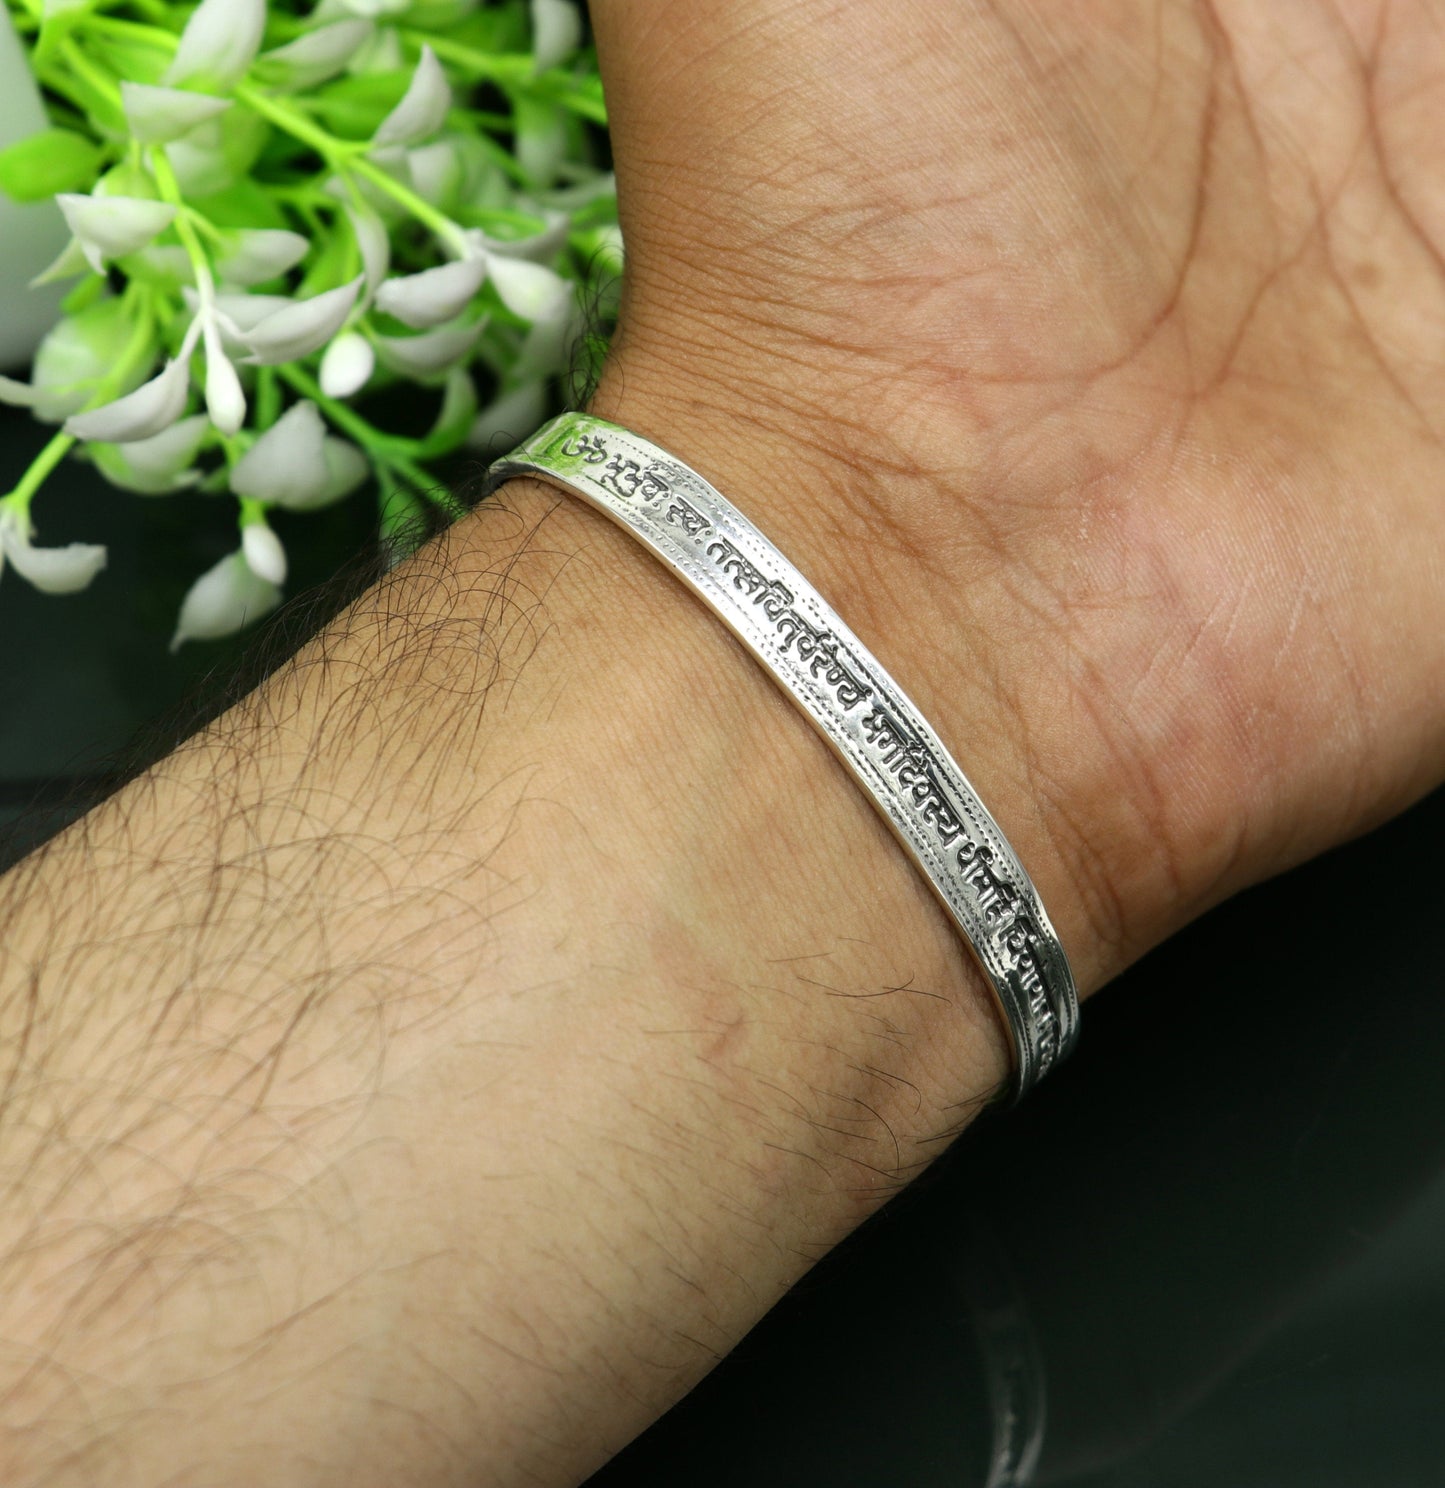 Authentic 925 sterling silver customized Gayatri Mantra design cuff kada bracelet, easy to adjust with your wrist, unisex jewelry cuff41 - TRIBAL ORNAMENTS